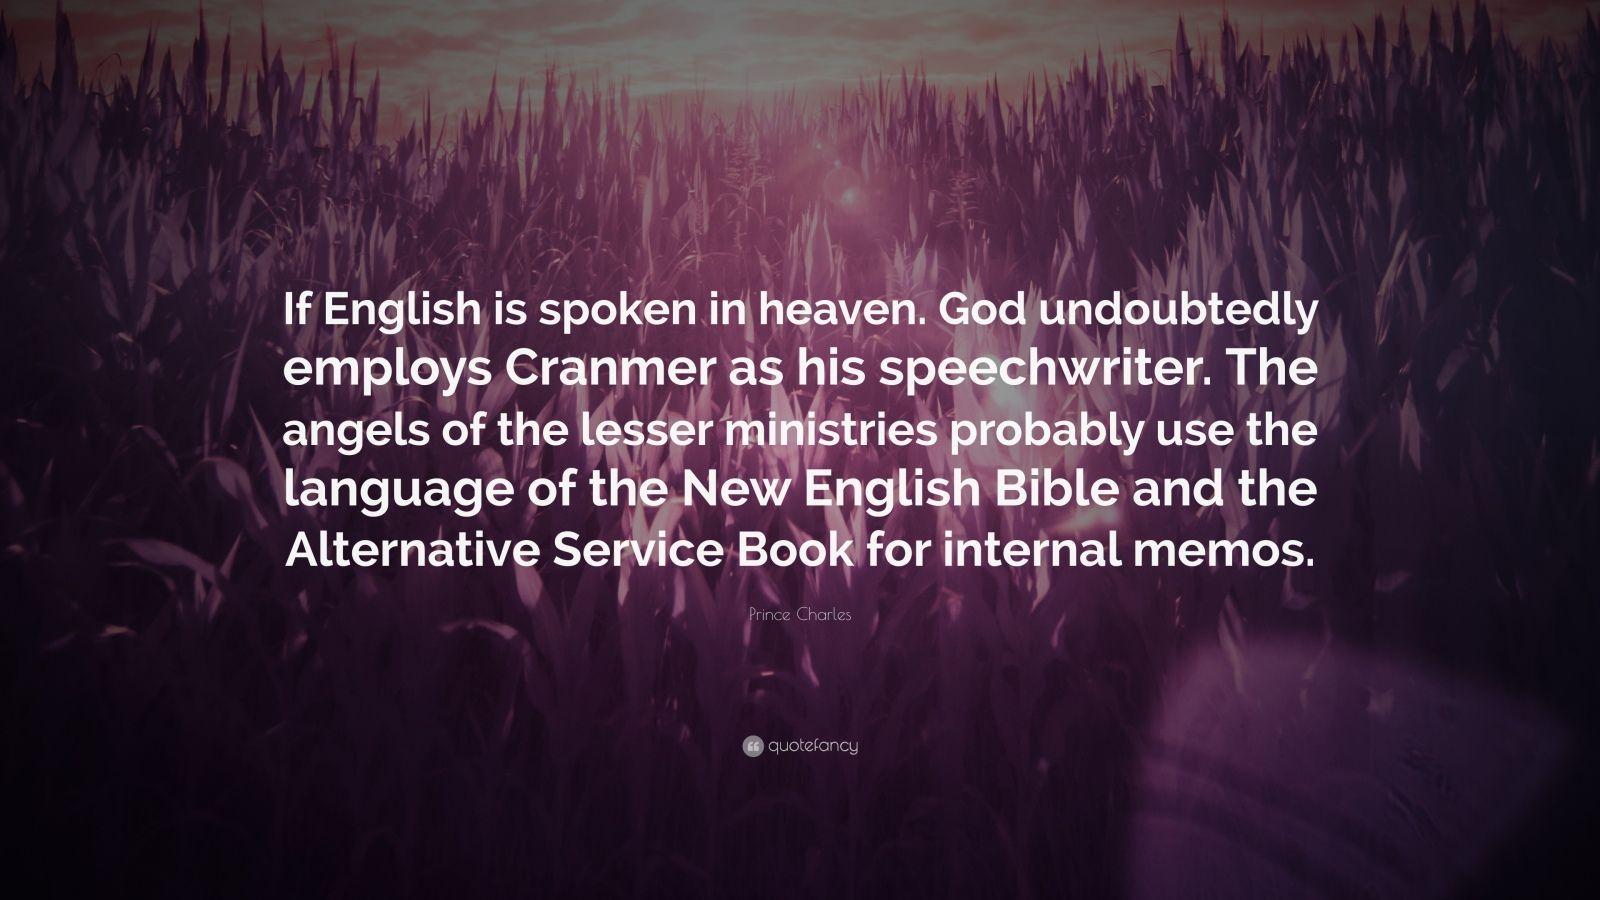 Prince Charles Quote: “If English is spoken in heaven. God